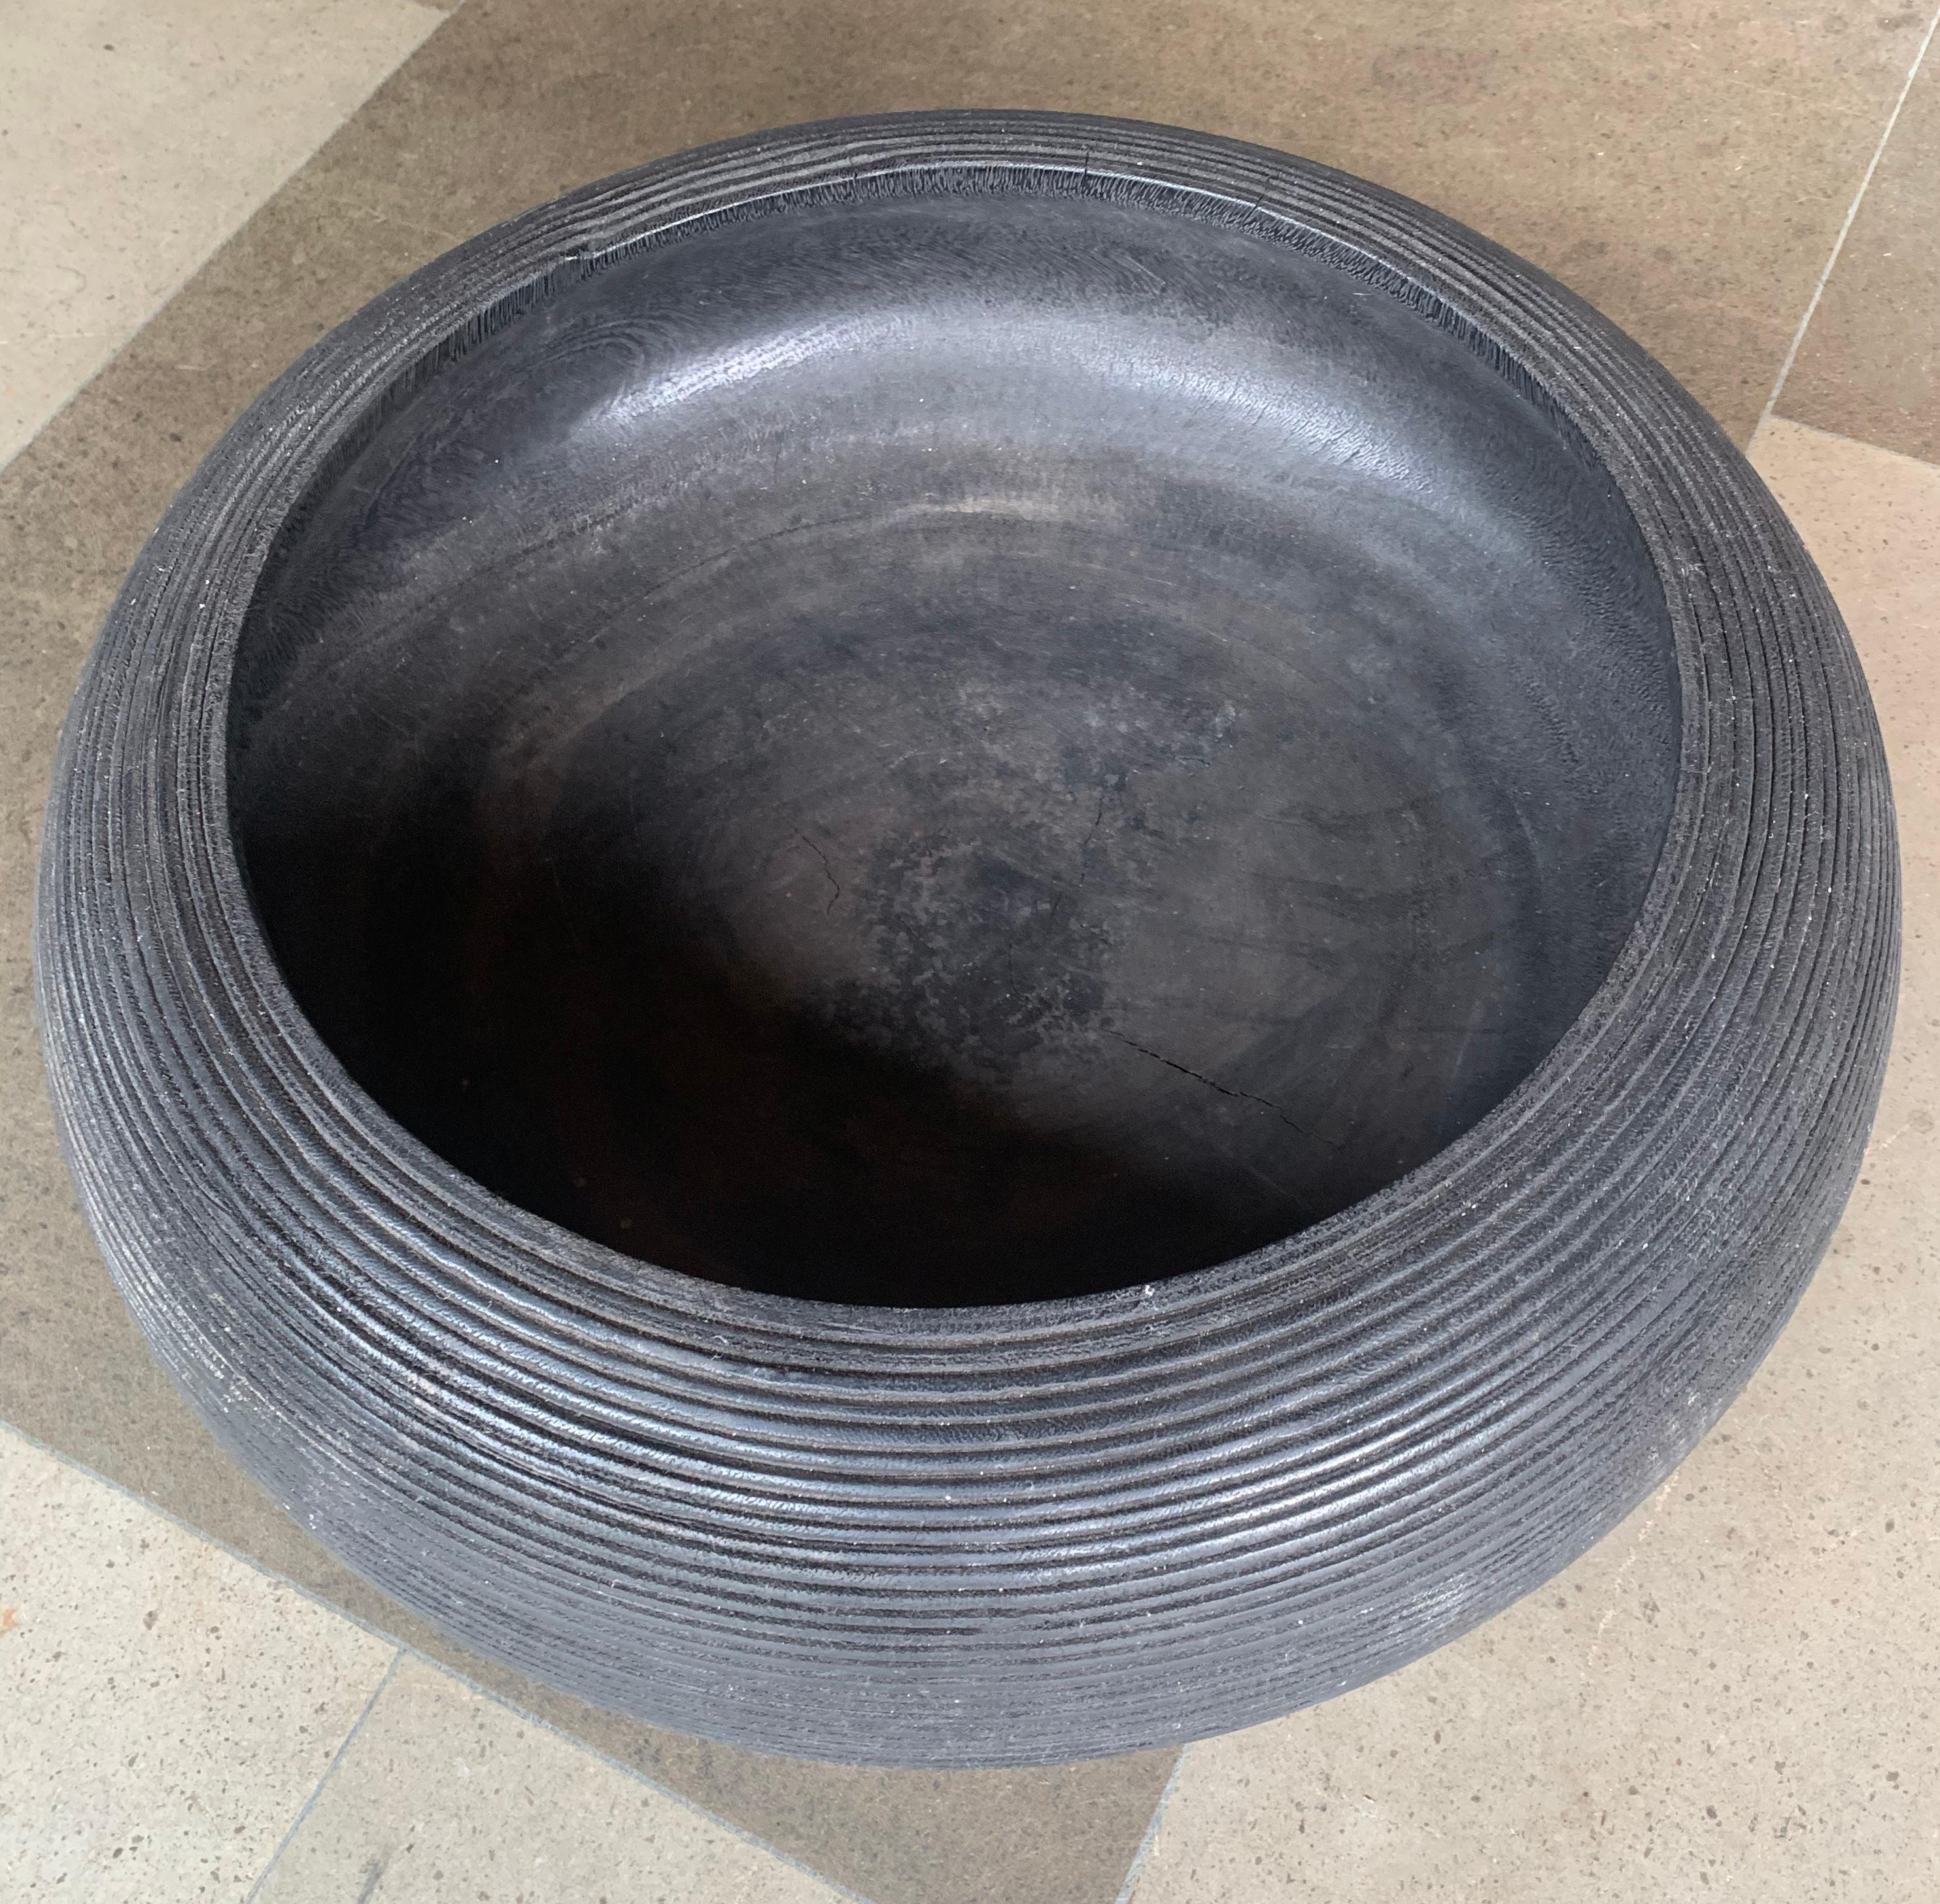 This wooden bowl features a black lacquer finish and ribbed pattern design on its exterior. It is crafted from Suar Wood and was made in Indonesia. Its simple design makes it a great decorative addition to any space. 

Dimensions: Height 17cm x